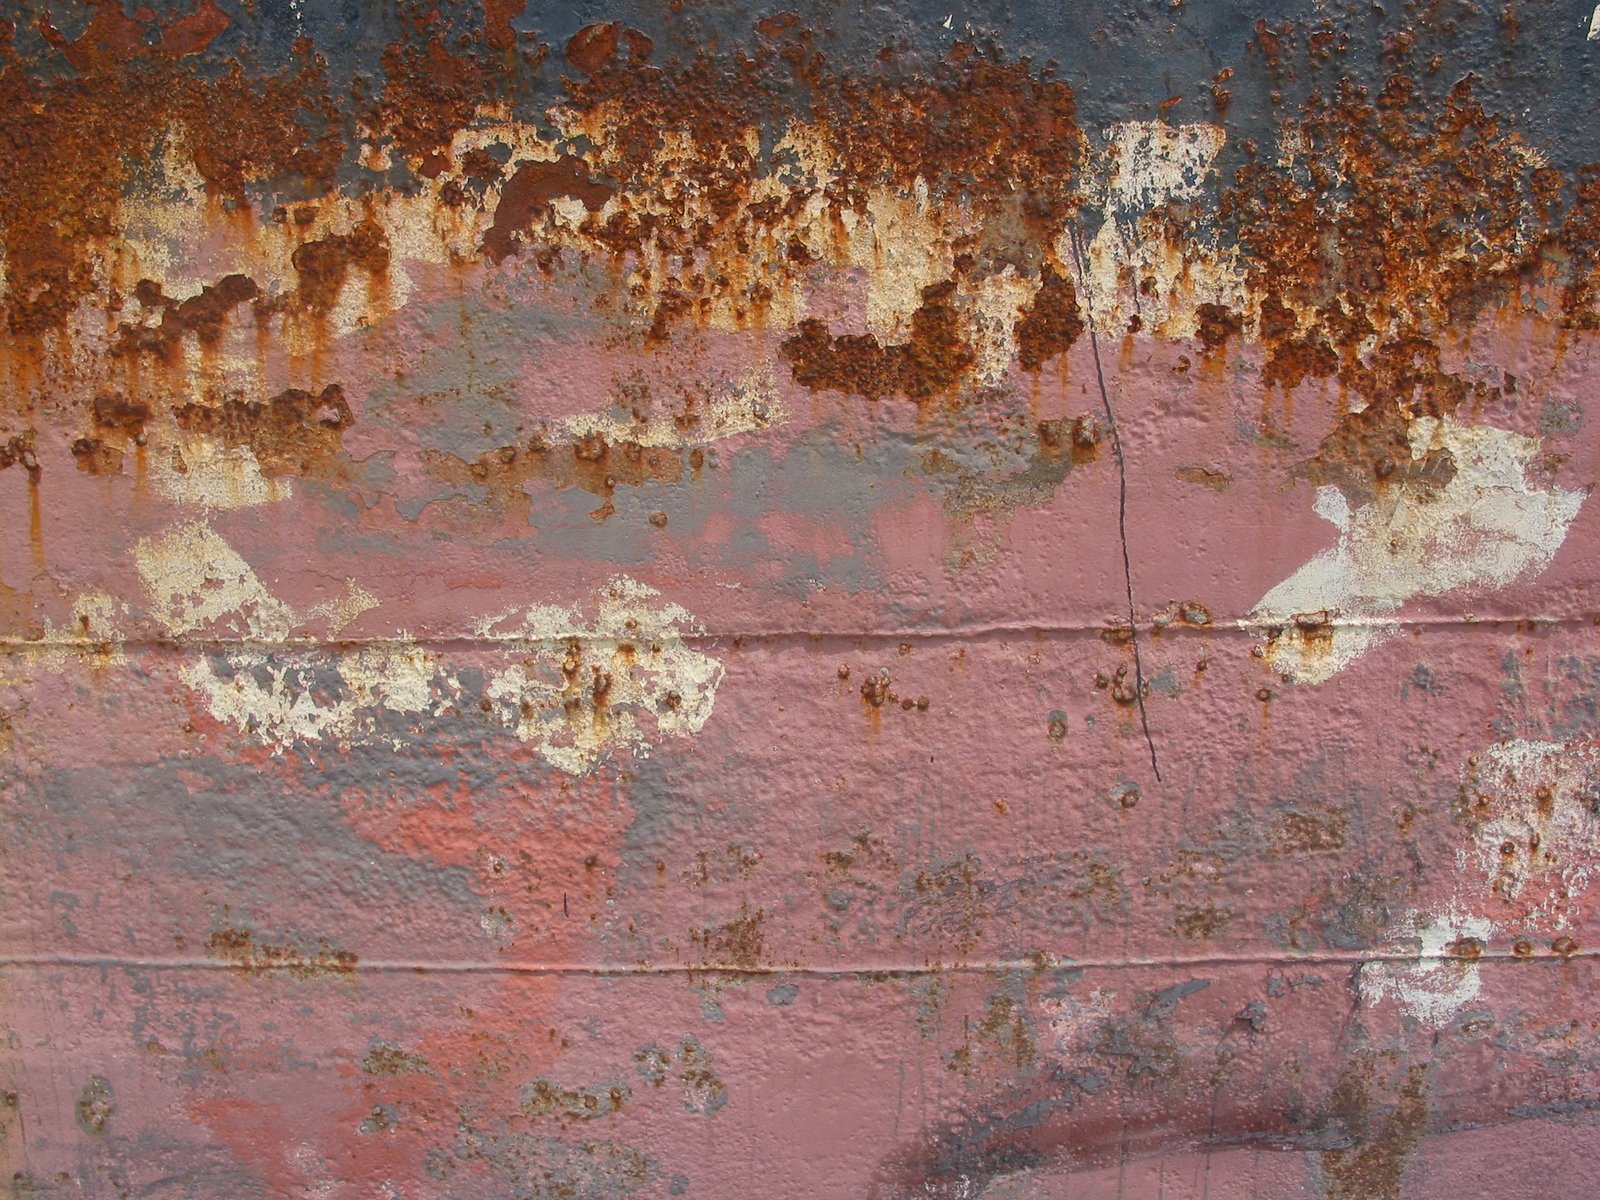 the rusted pink surface is covered by grey, yellow and red paint